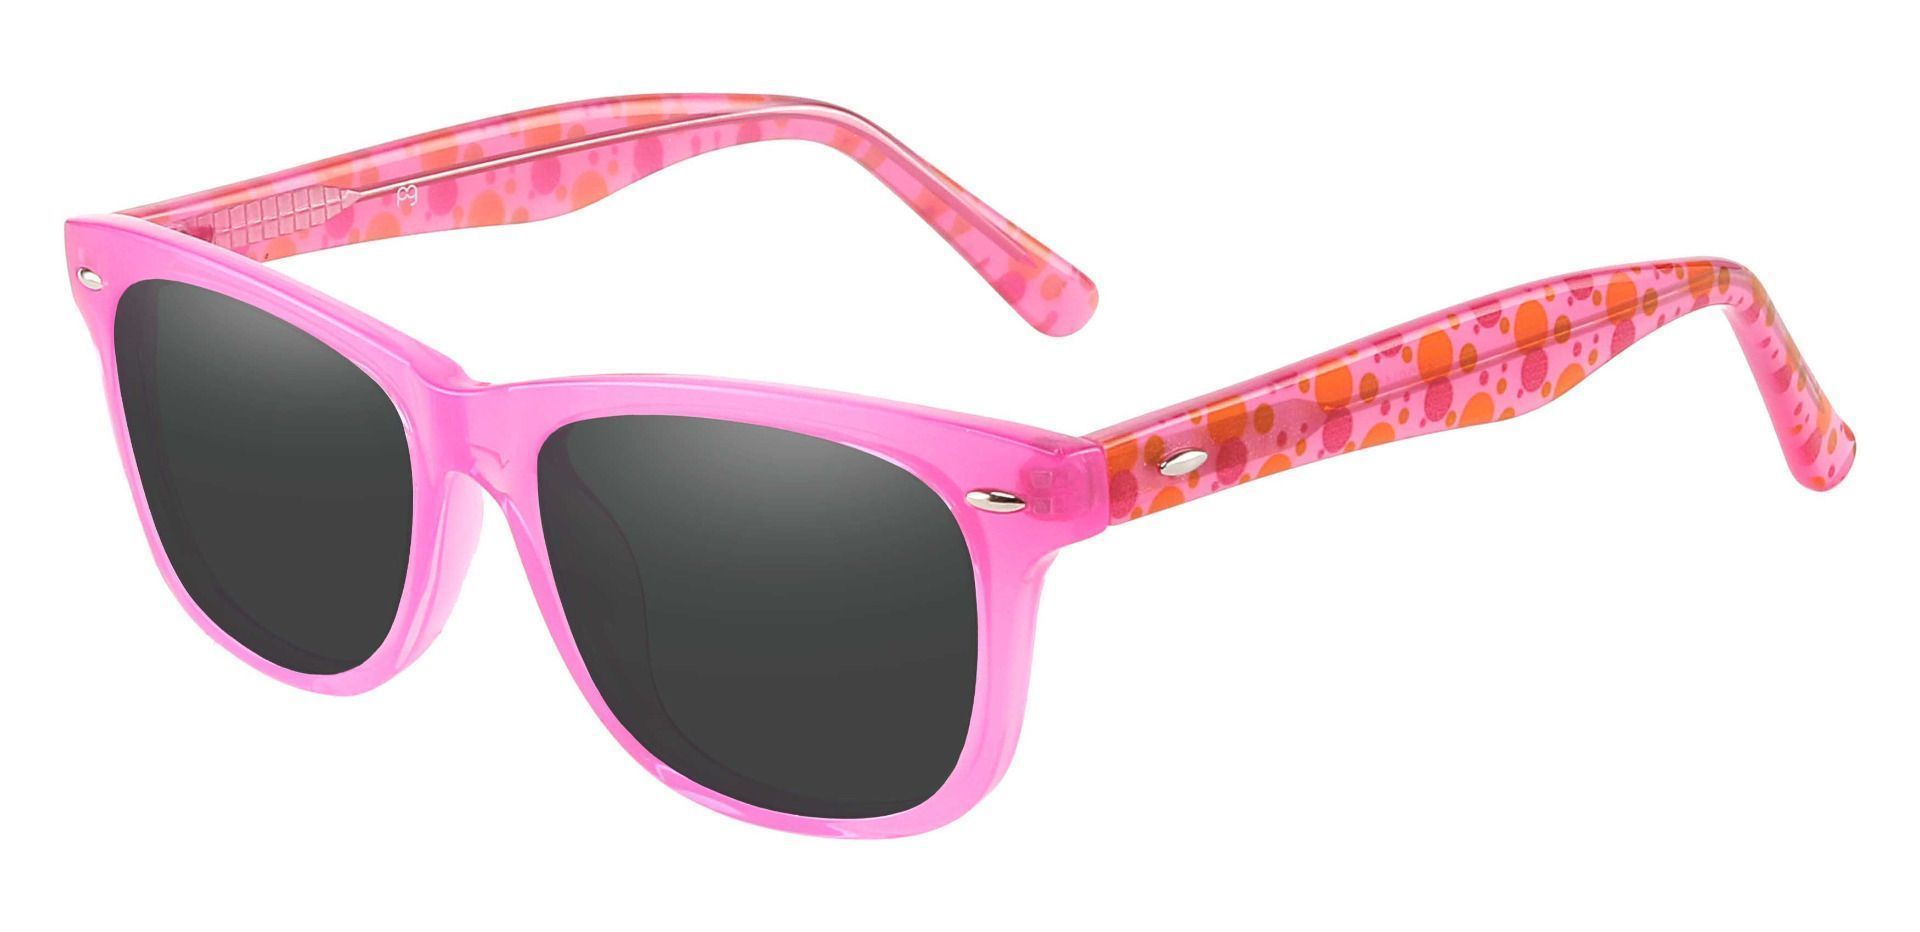 Eureka Square Reading Sunglasses - Pink Frame With Gray Lenses